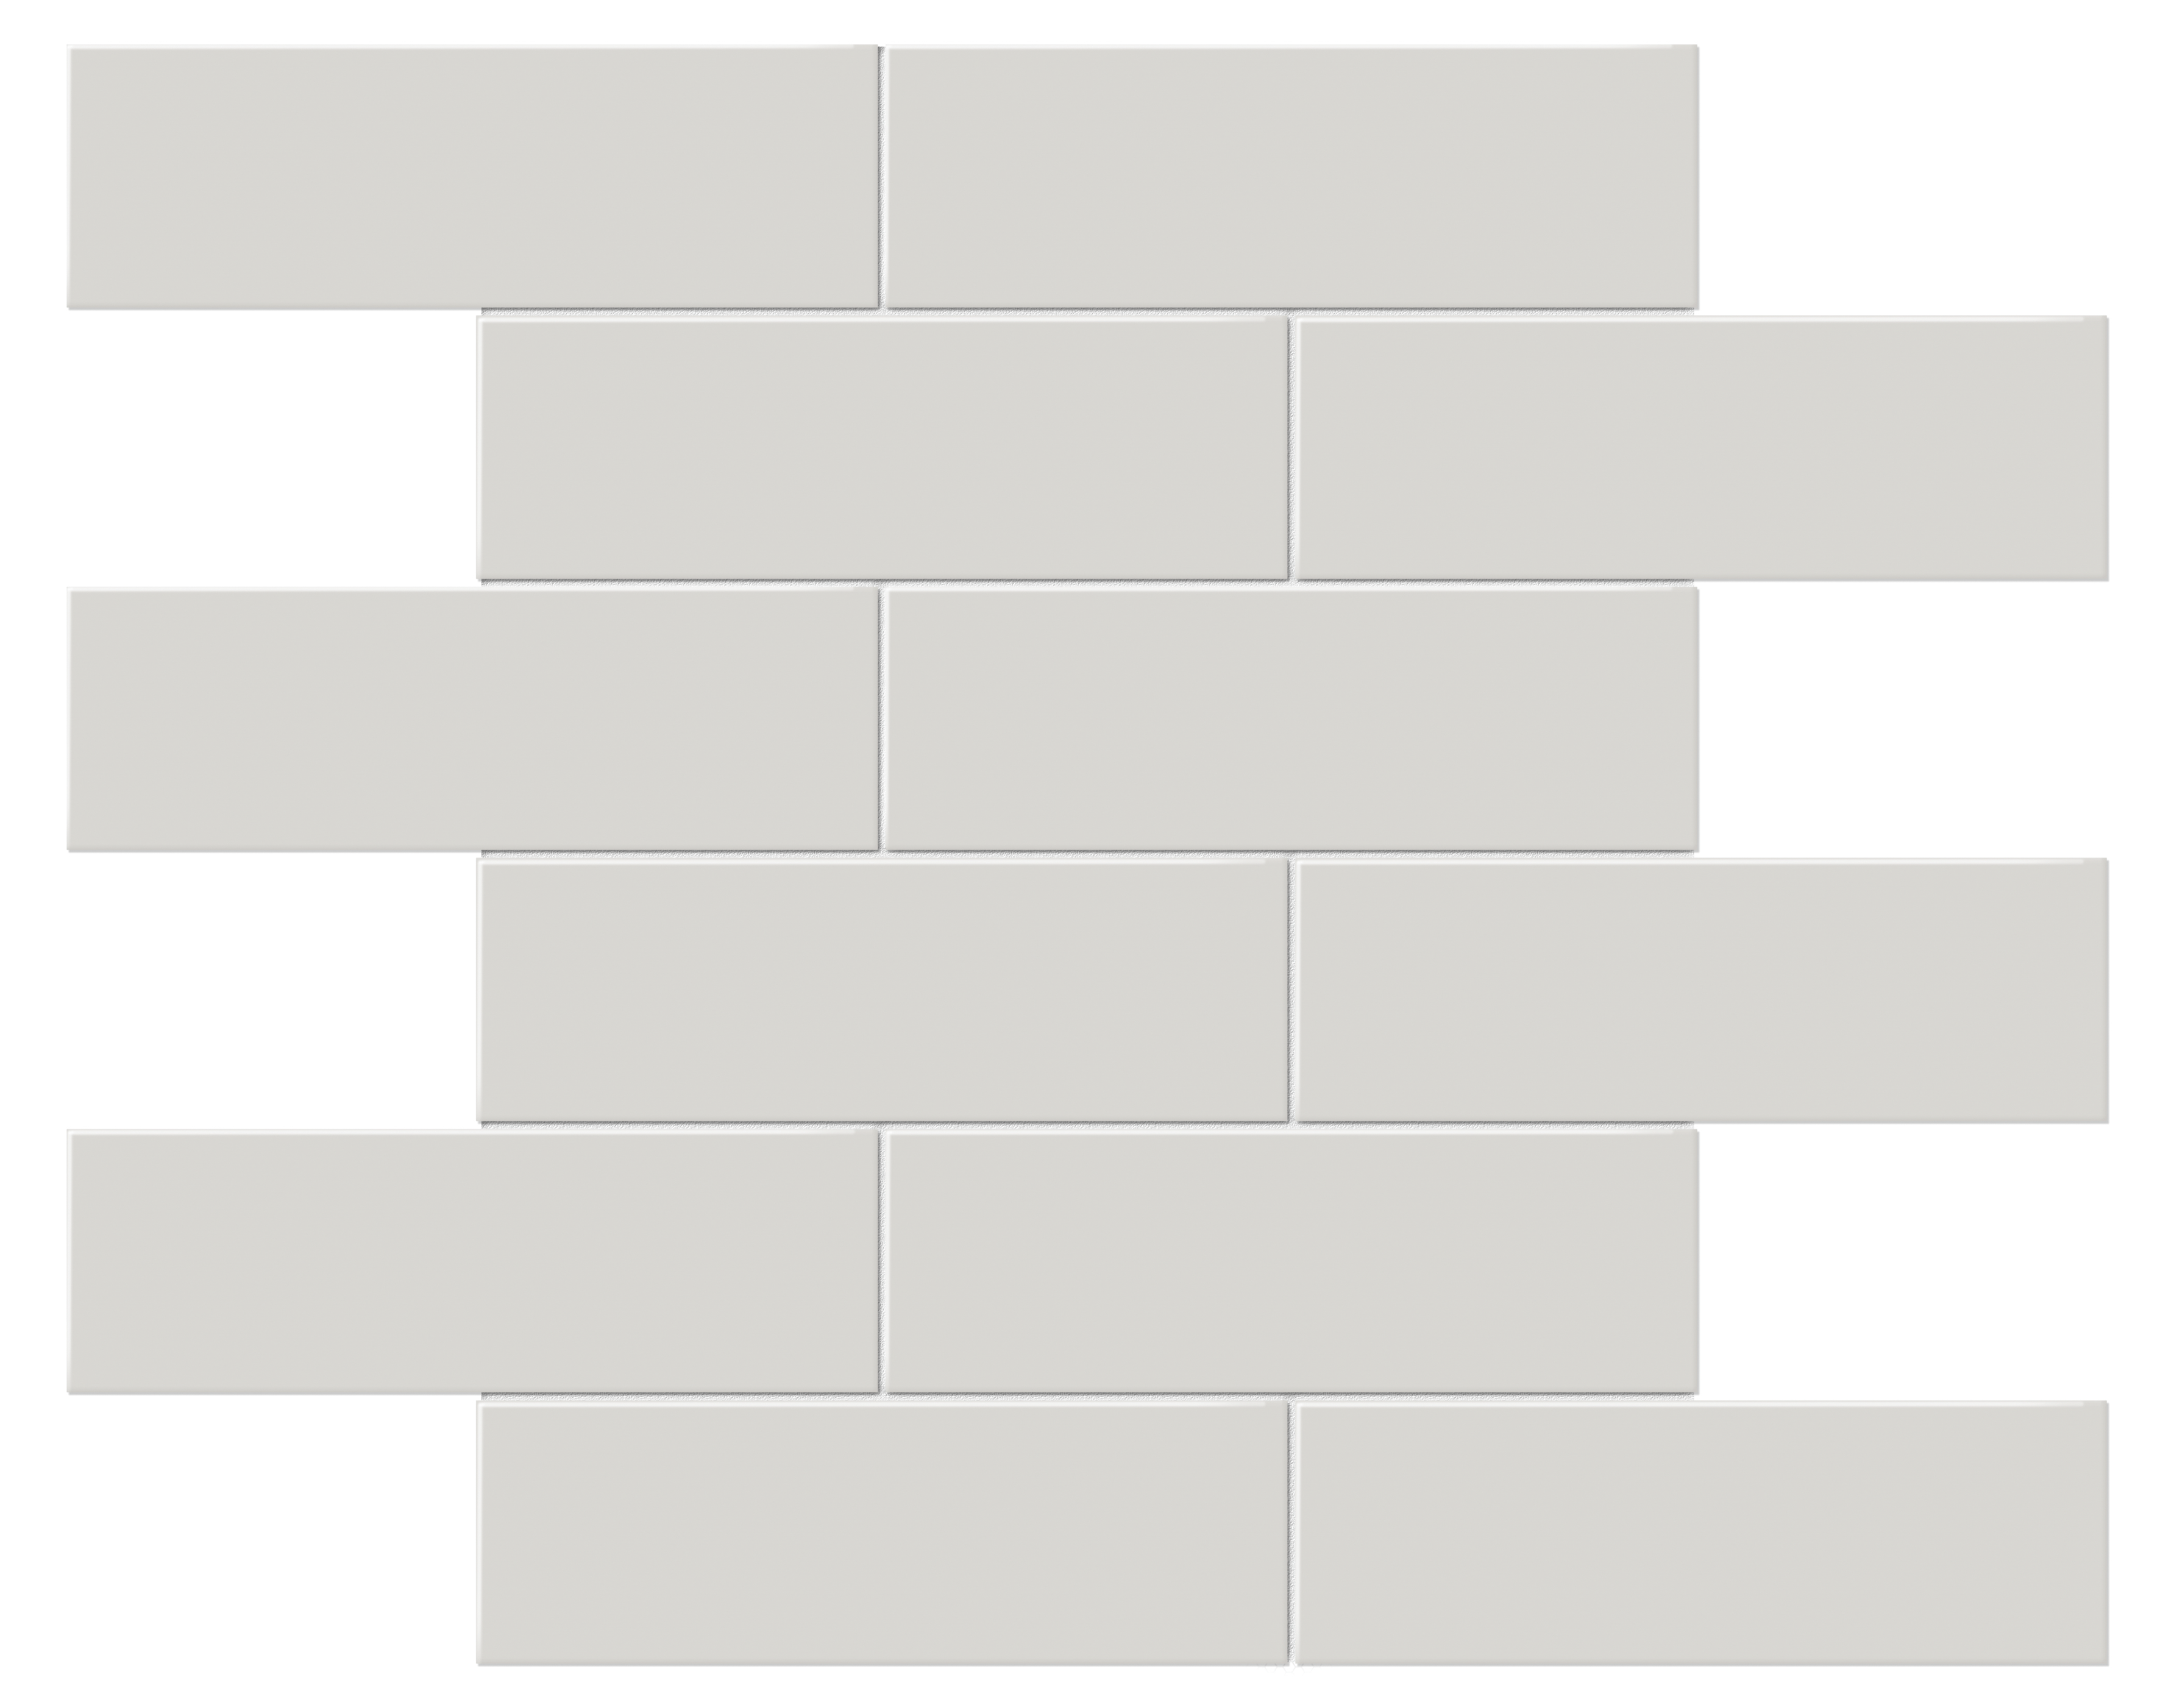 halo grey brick offset 2x6-inch pattern glazed porcelain mosaic from soho anatolia collection distributed by surface group international glossy finish pressed edge mesh shape